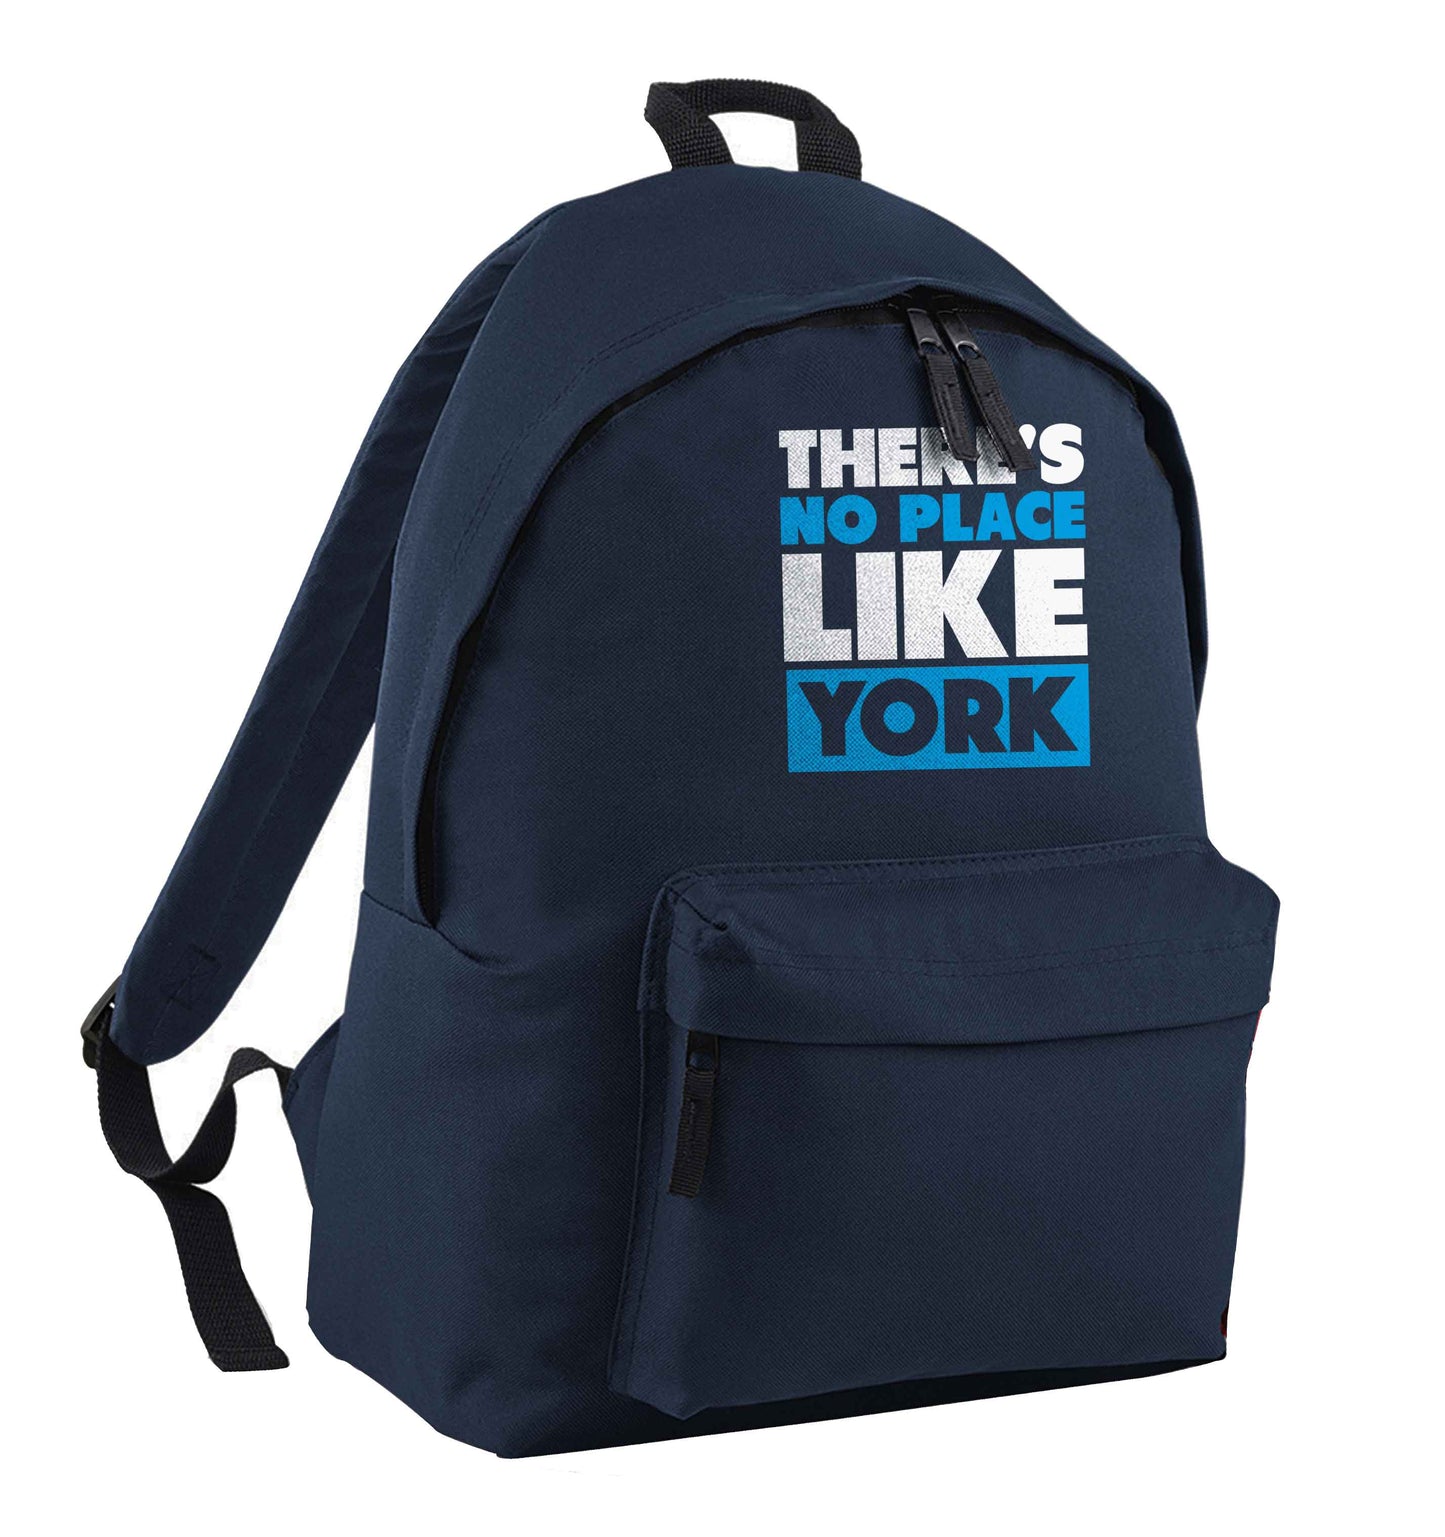 There's no place like york navy children's backpack